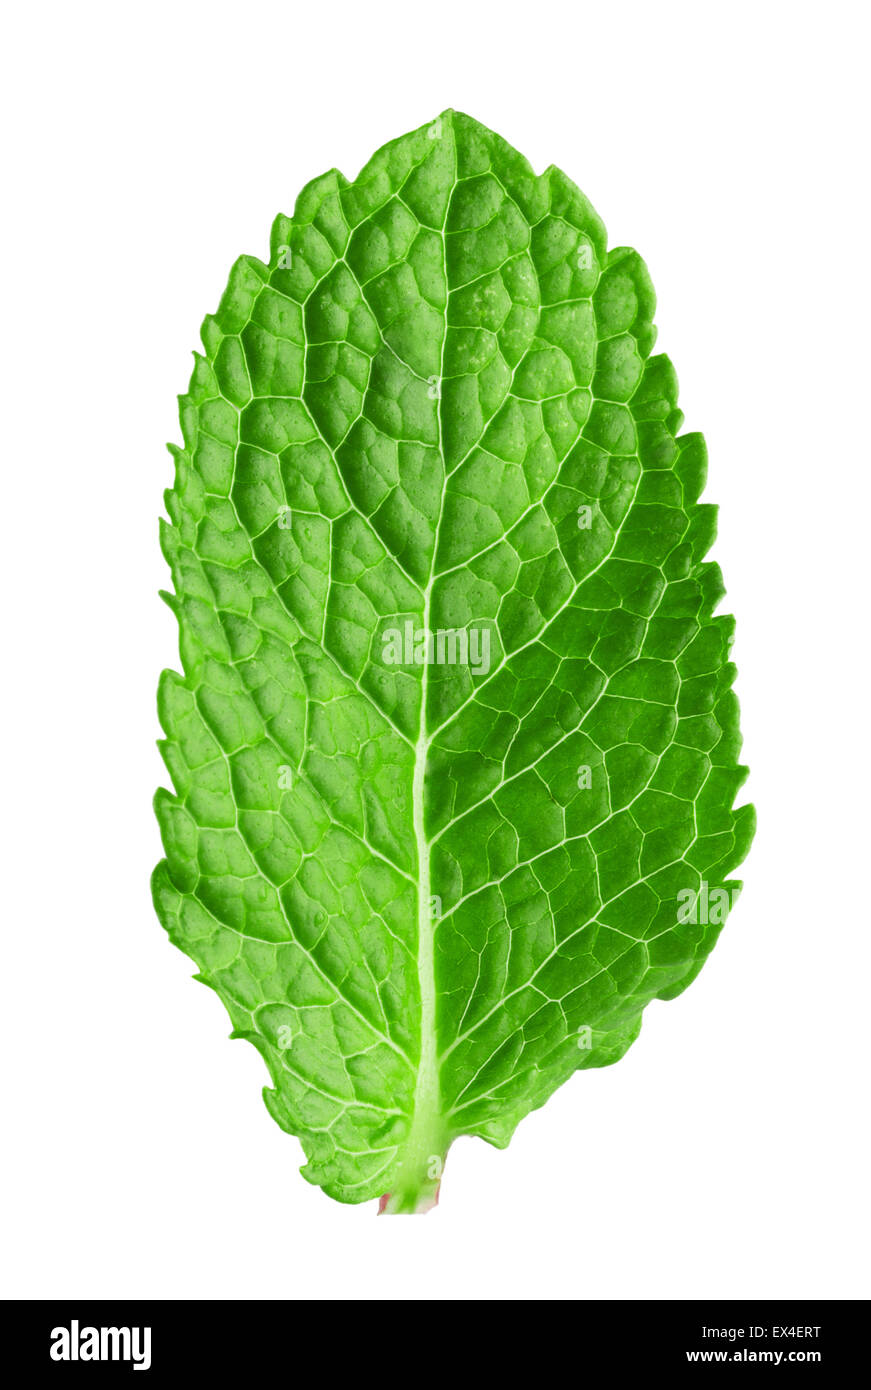 mint leaf isolated on the white background. Stock Photo